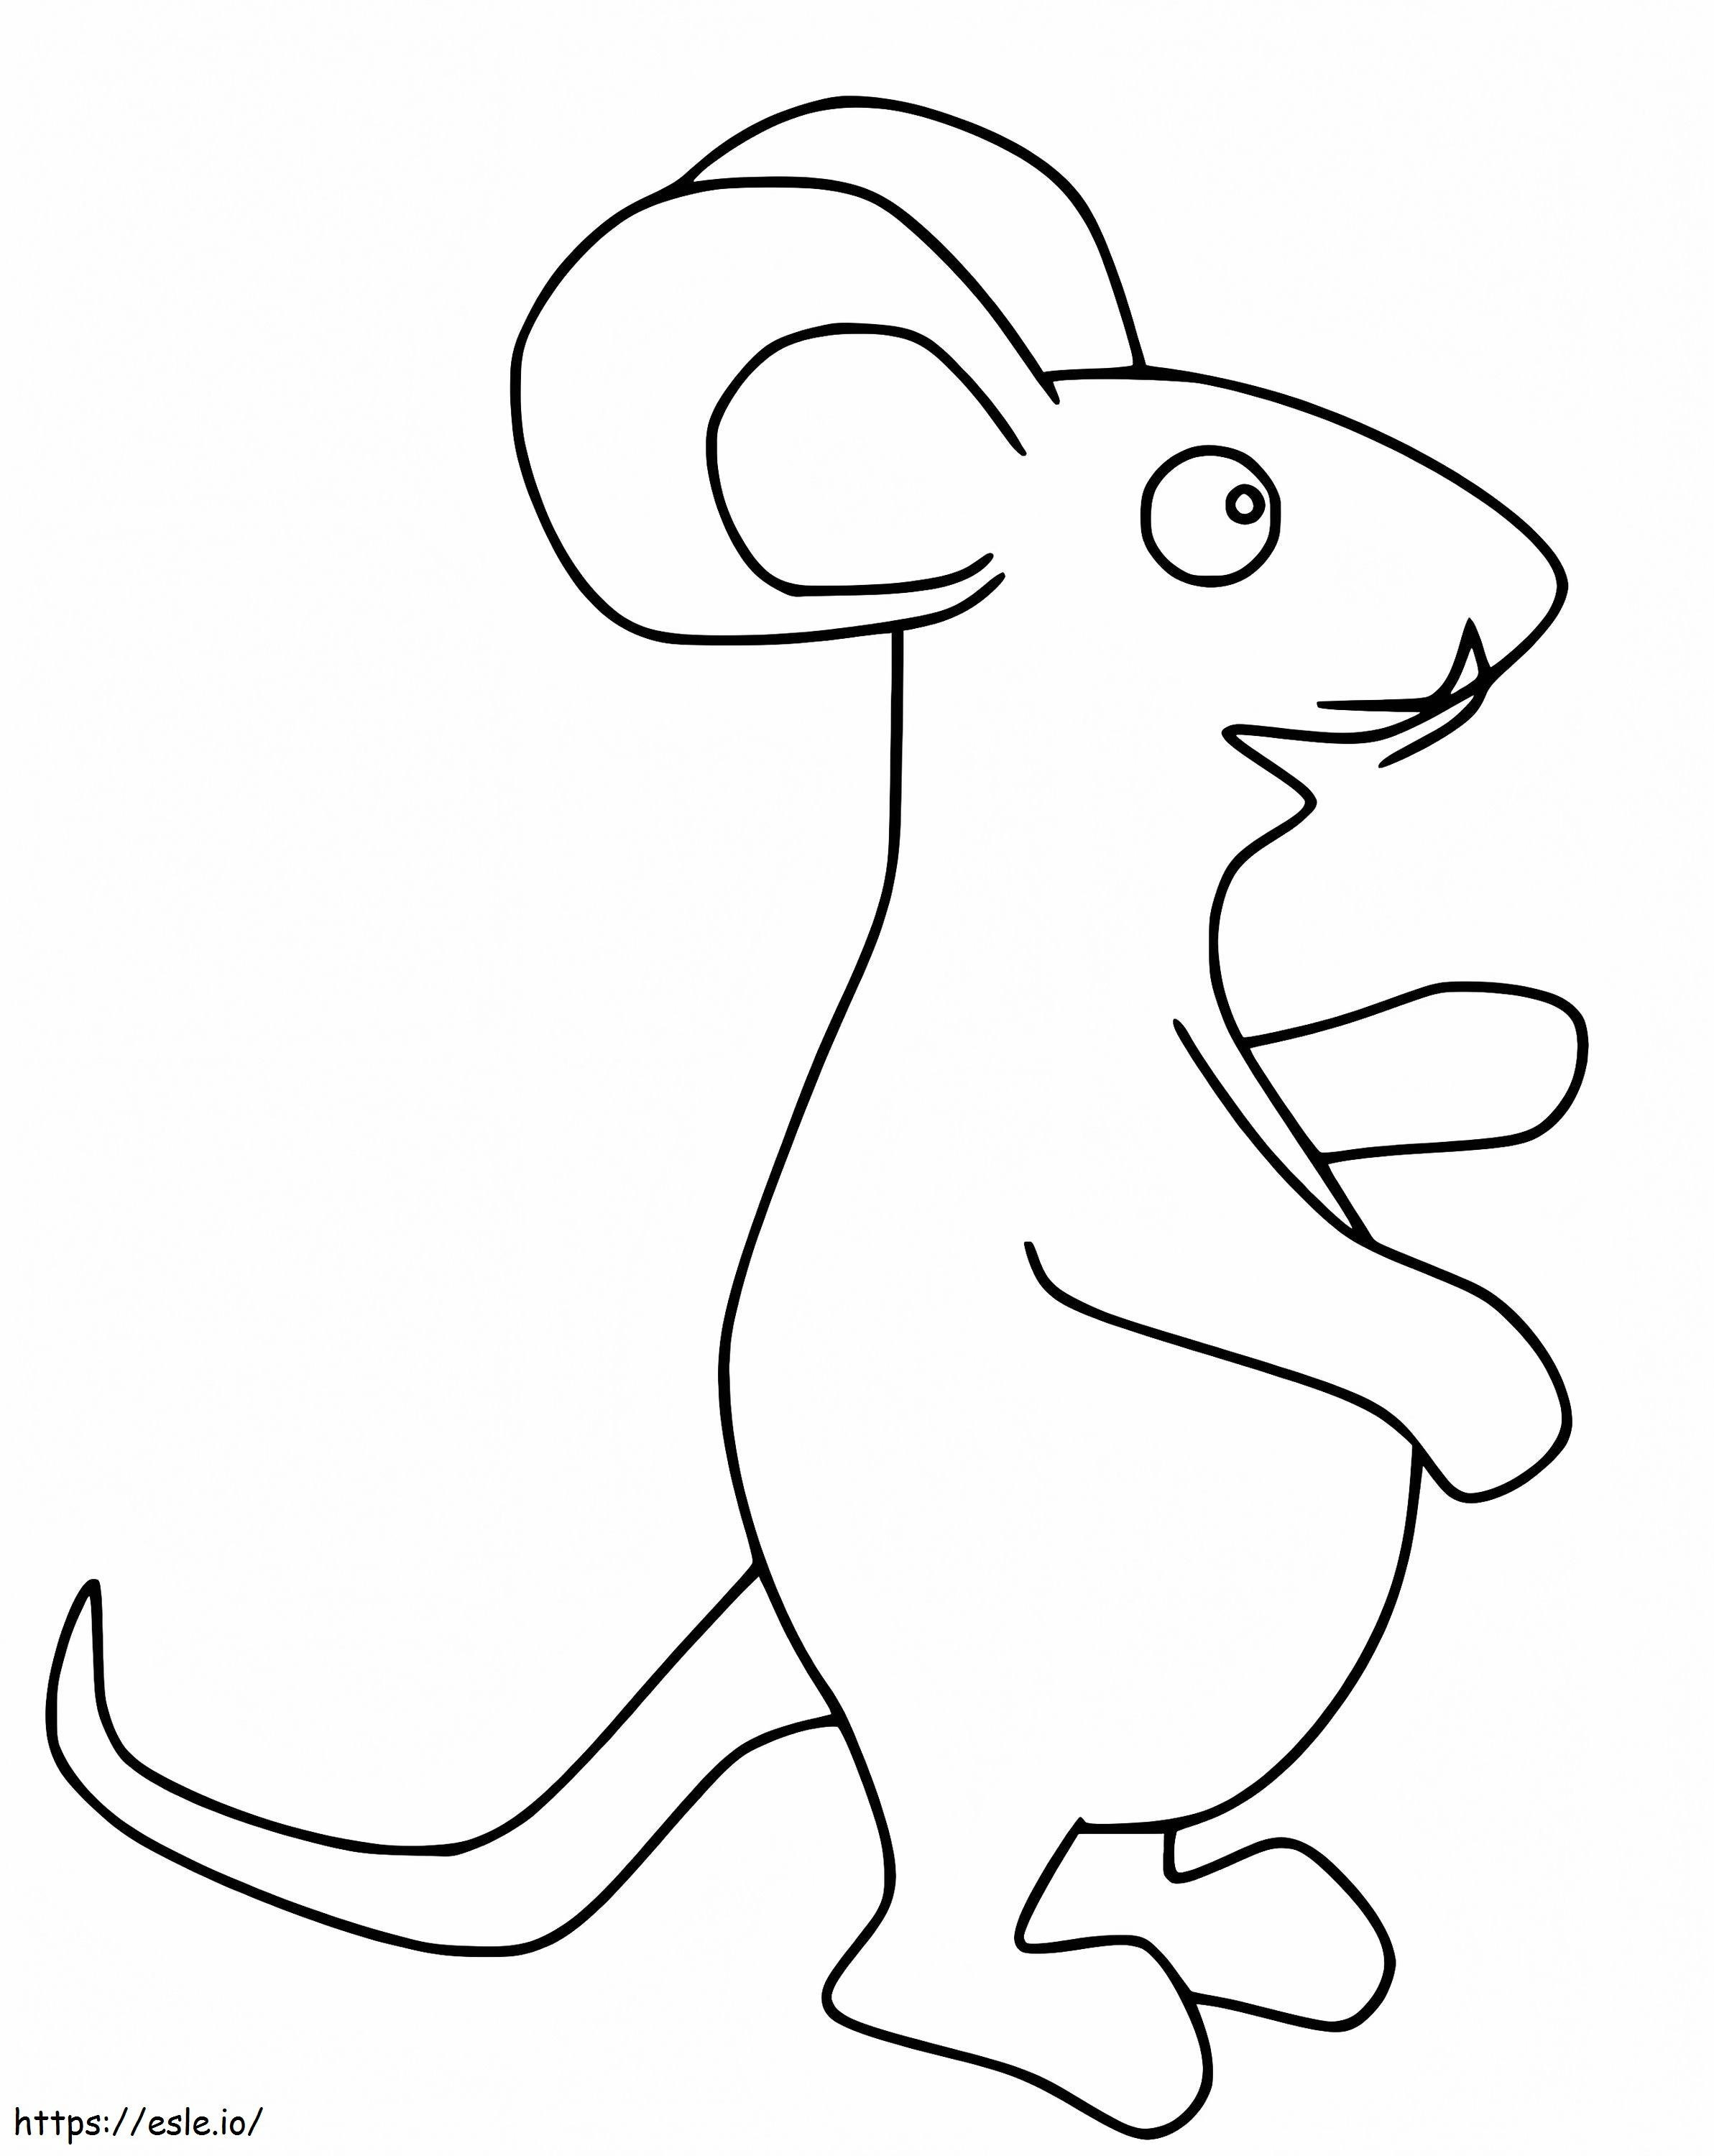 Mouse From Gruffalo 1 coloring page